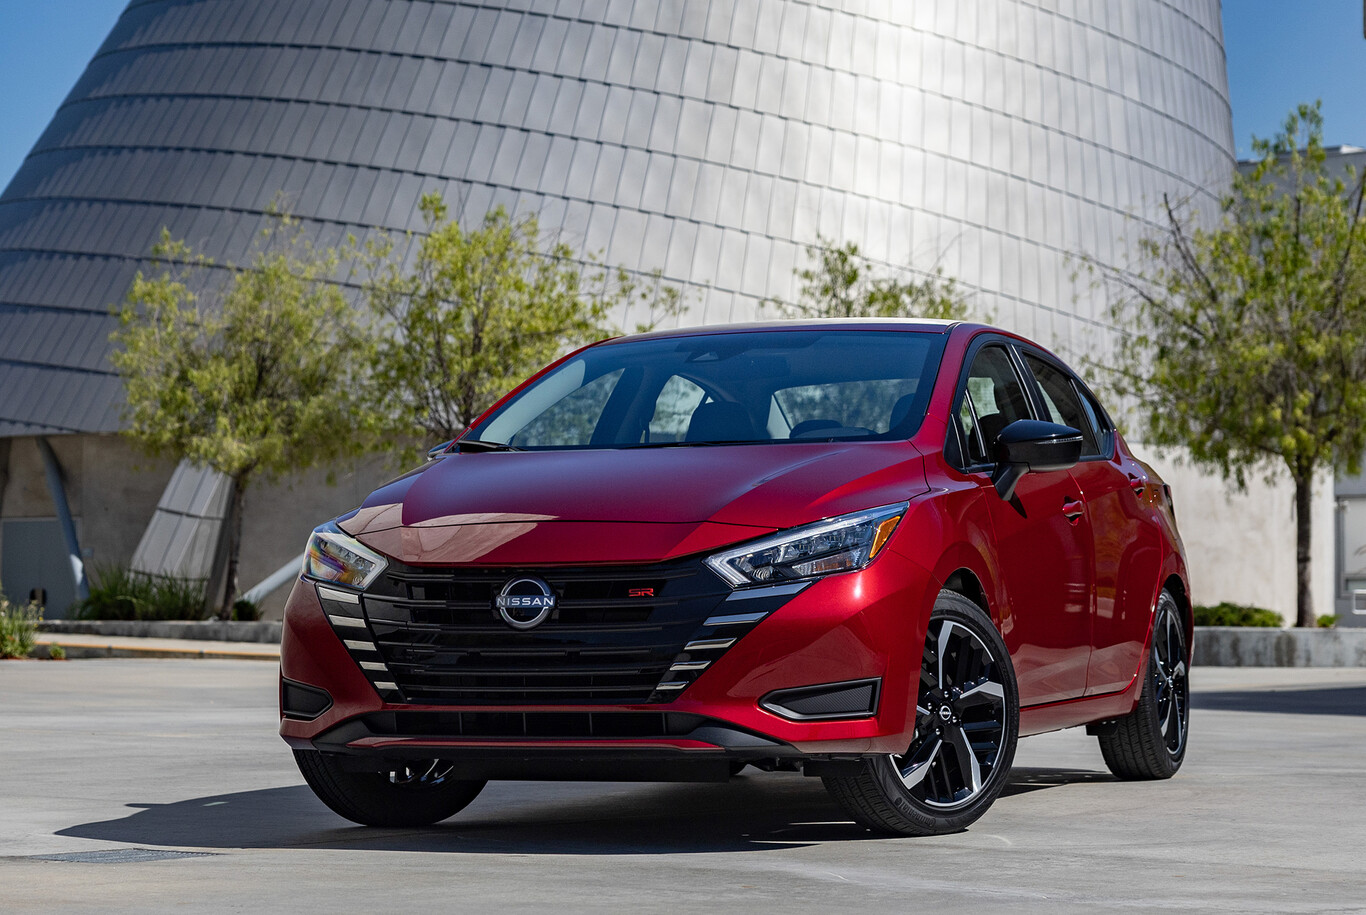 Know the price of the Nissan Versa 2023 in Mexico